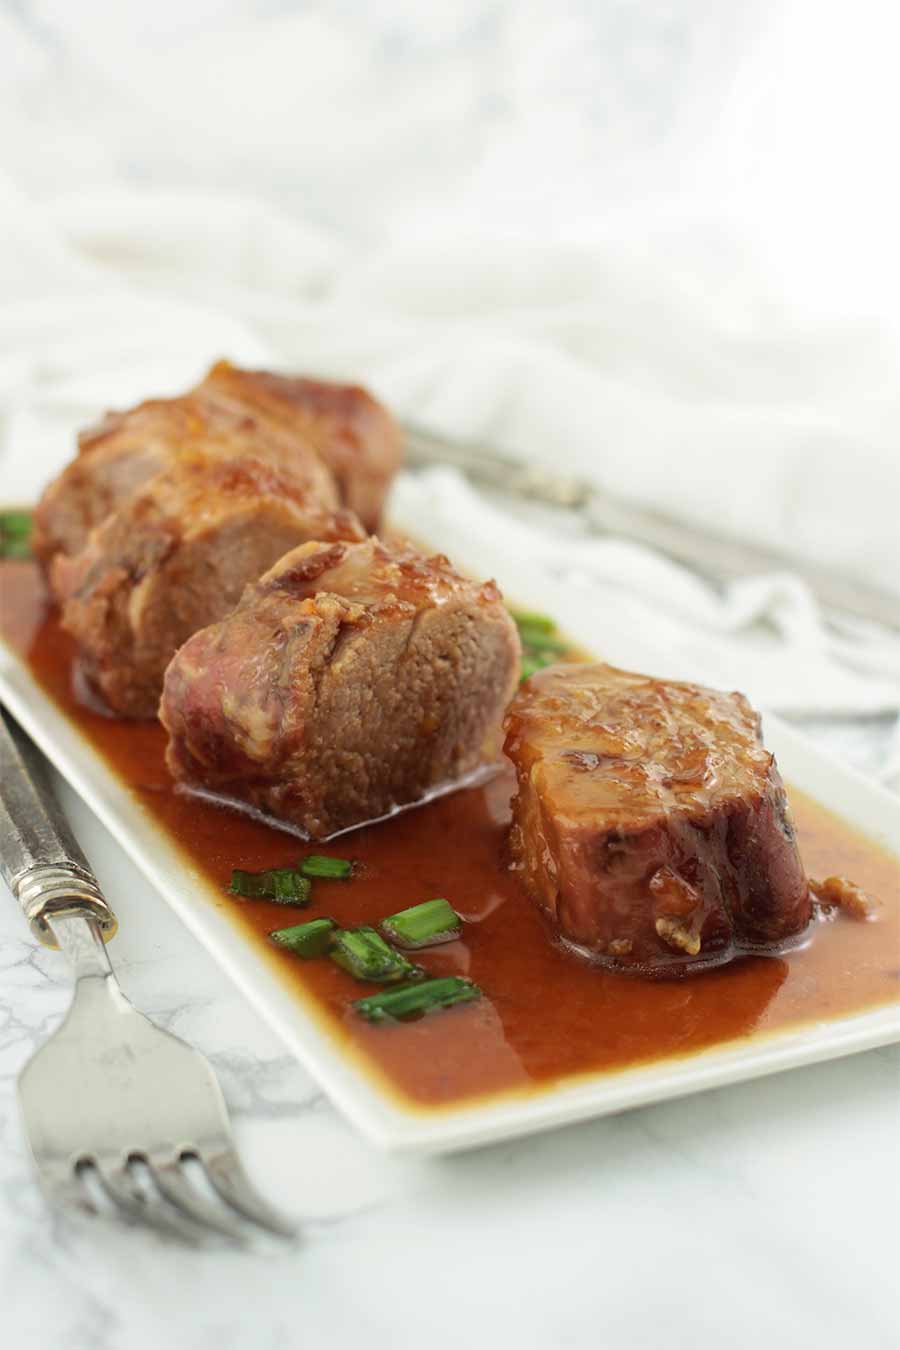 Slices of Orange-Glazed Pork Tenderloin swimming in sauce and green onions from acleanplate.com